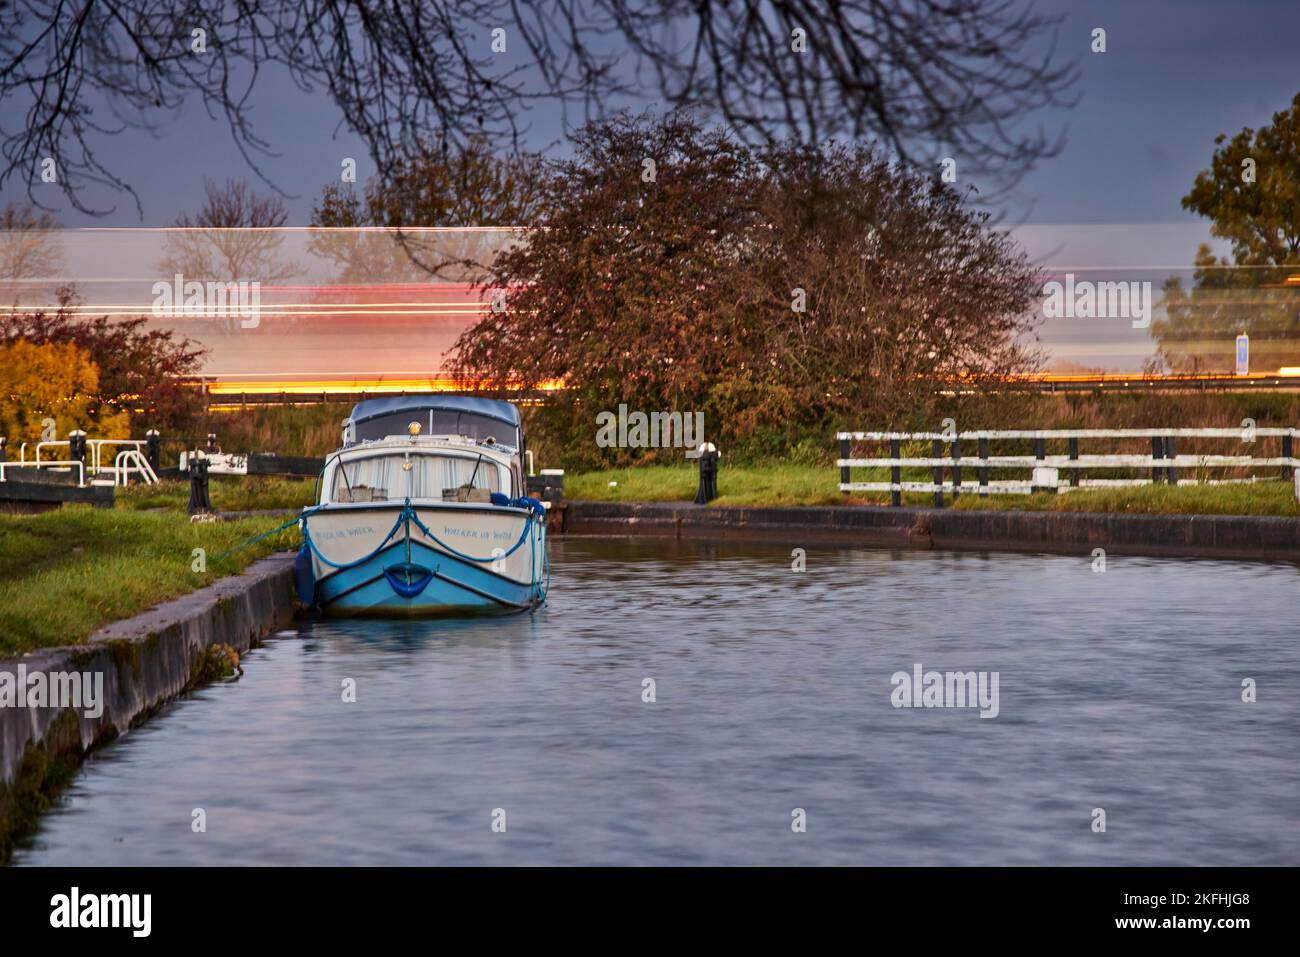 LOCK 57 Moorings Waterway Trent e canale Mersey in Alsager Cheshire Est vicino Stoke-on-Trent Foto Stock